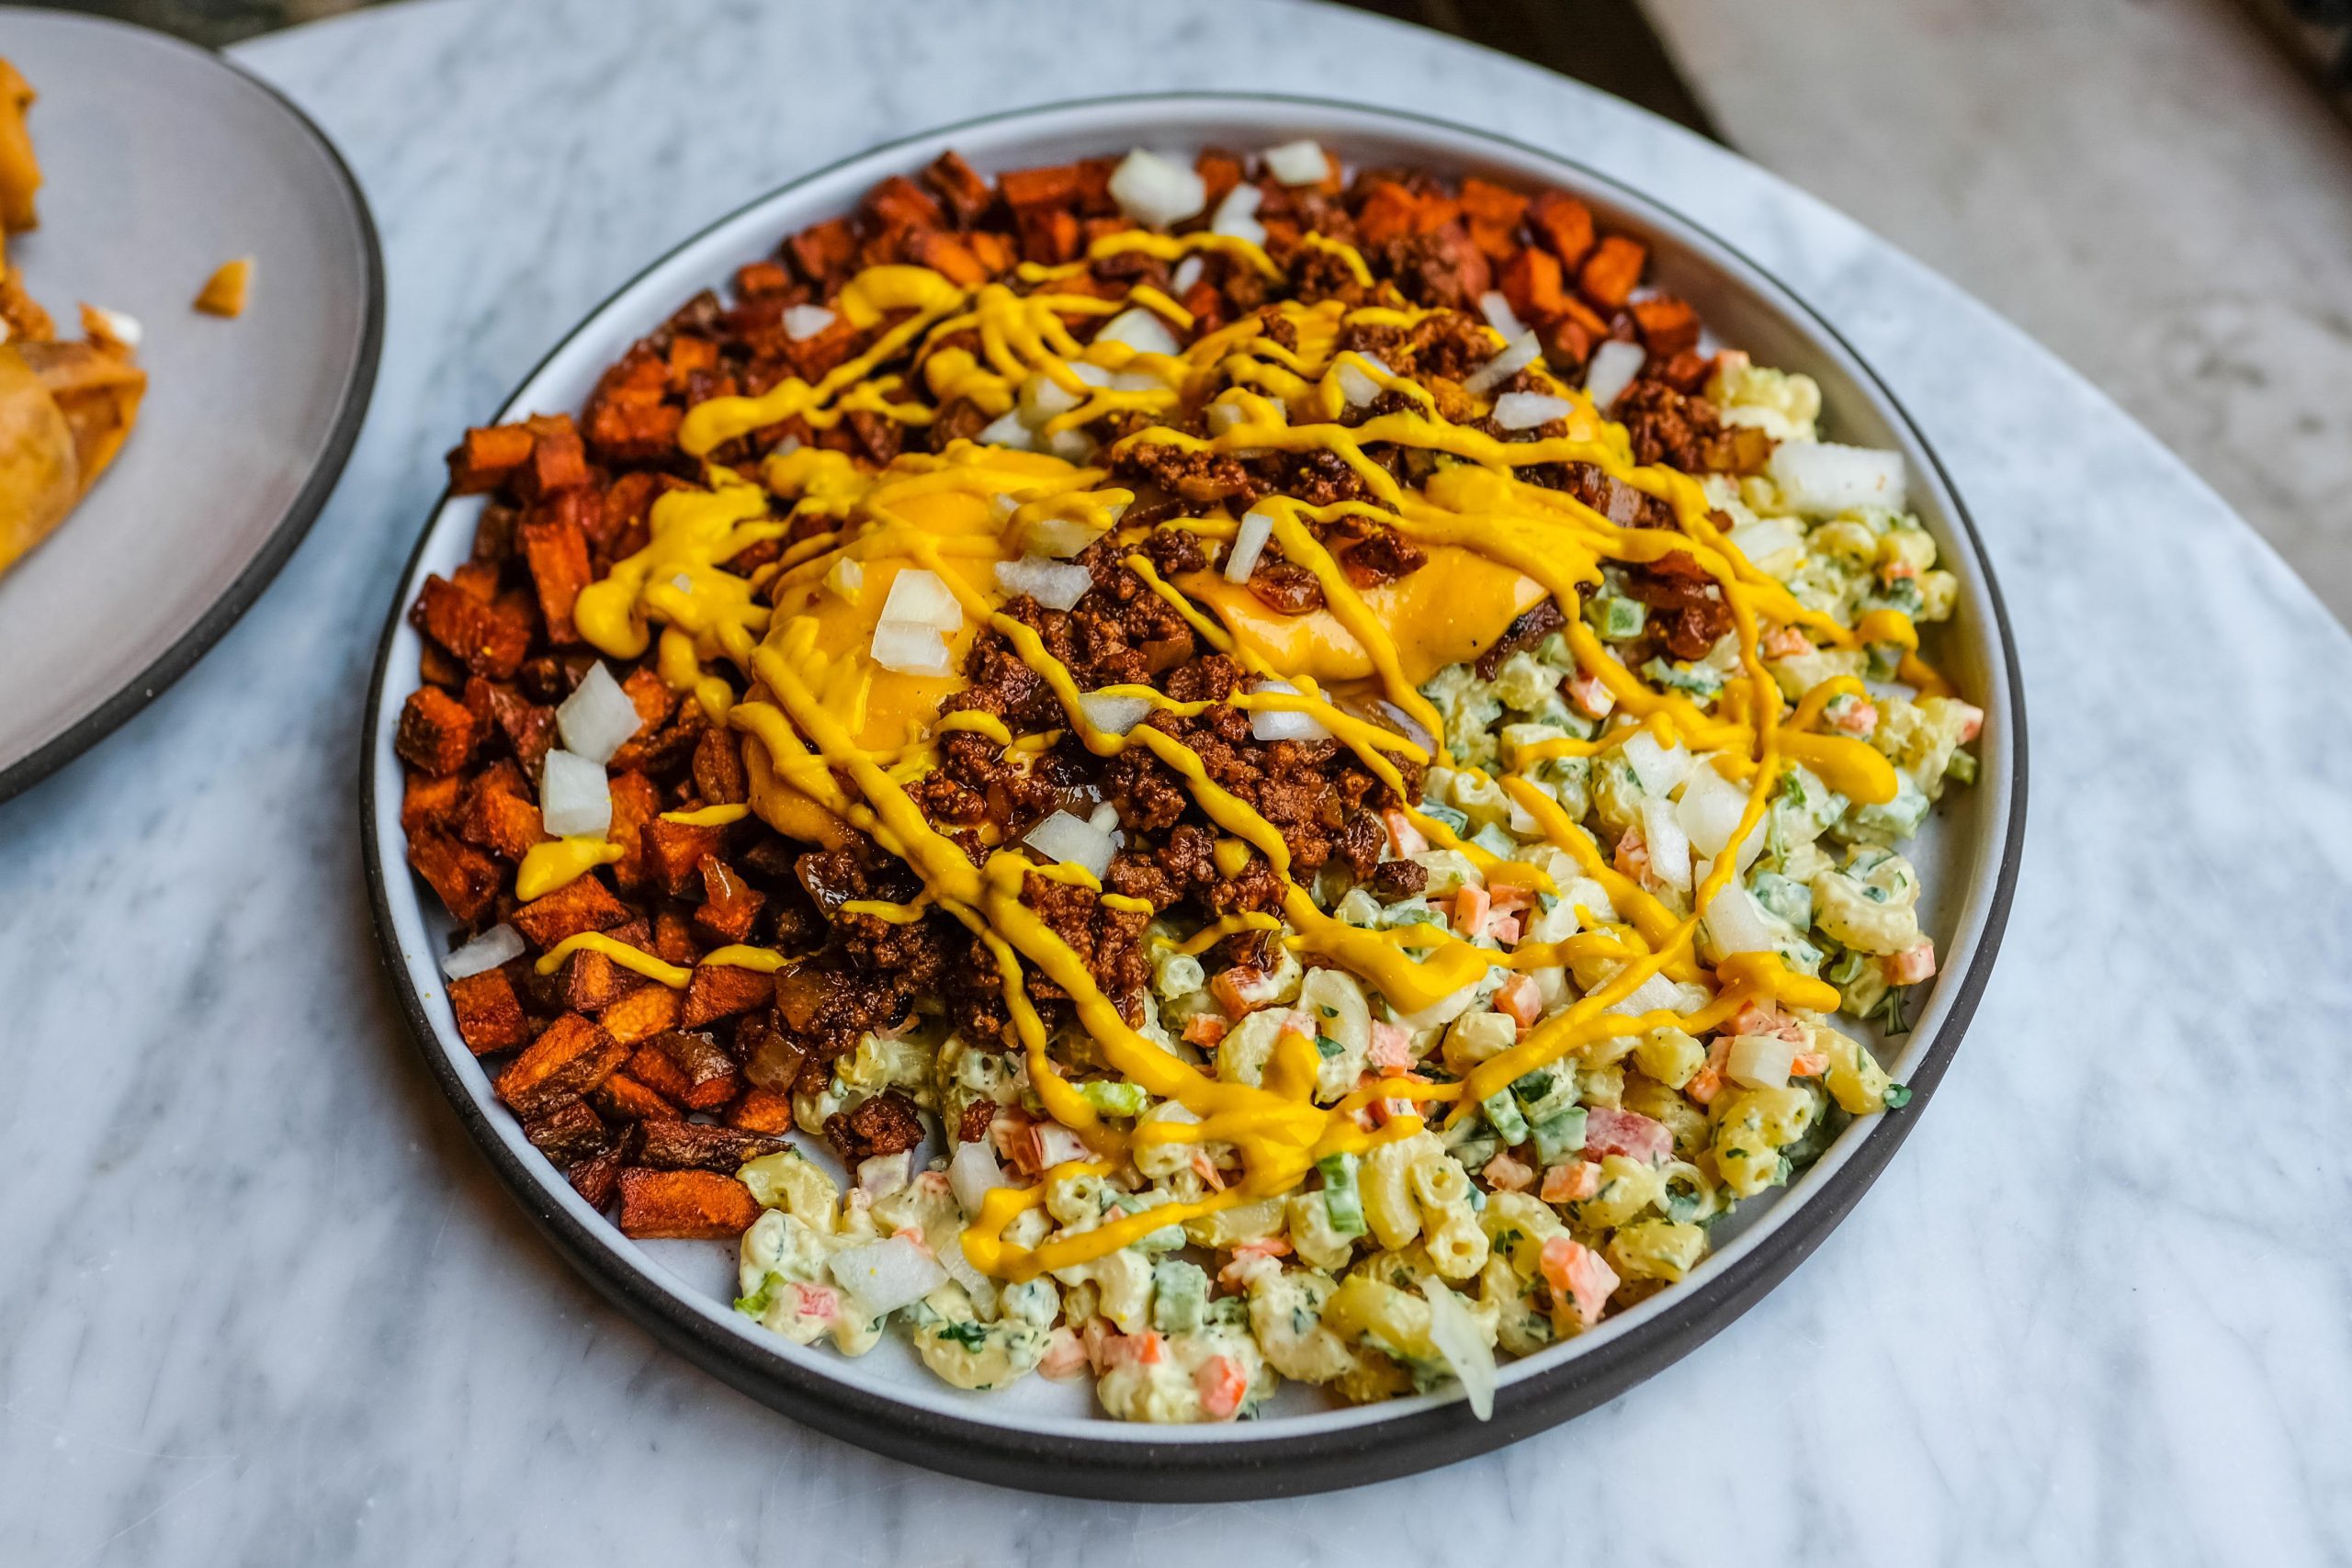 THE TOP 10 - Garbage Plate Reviews